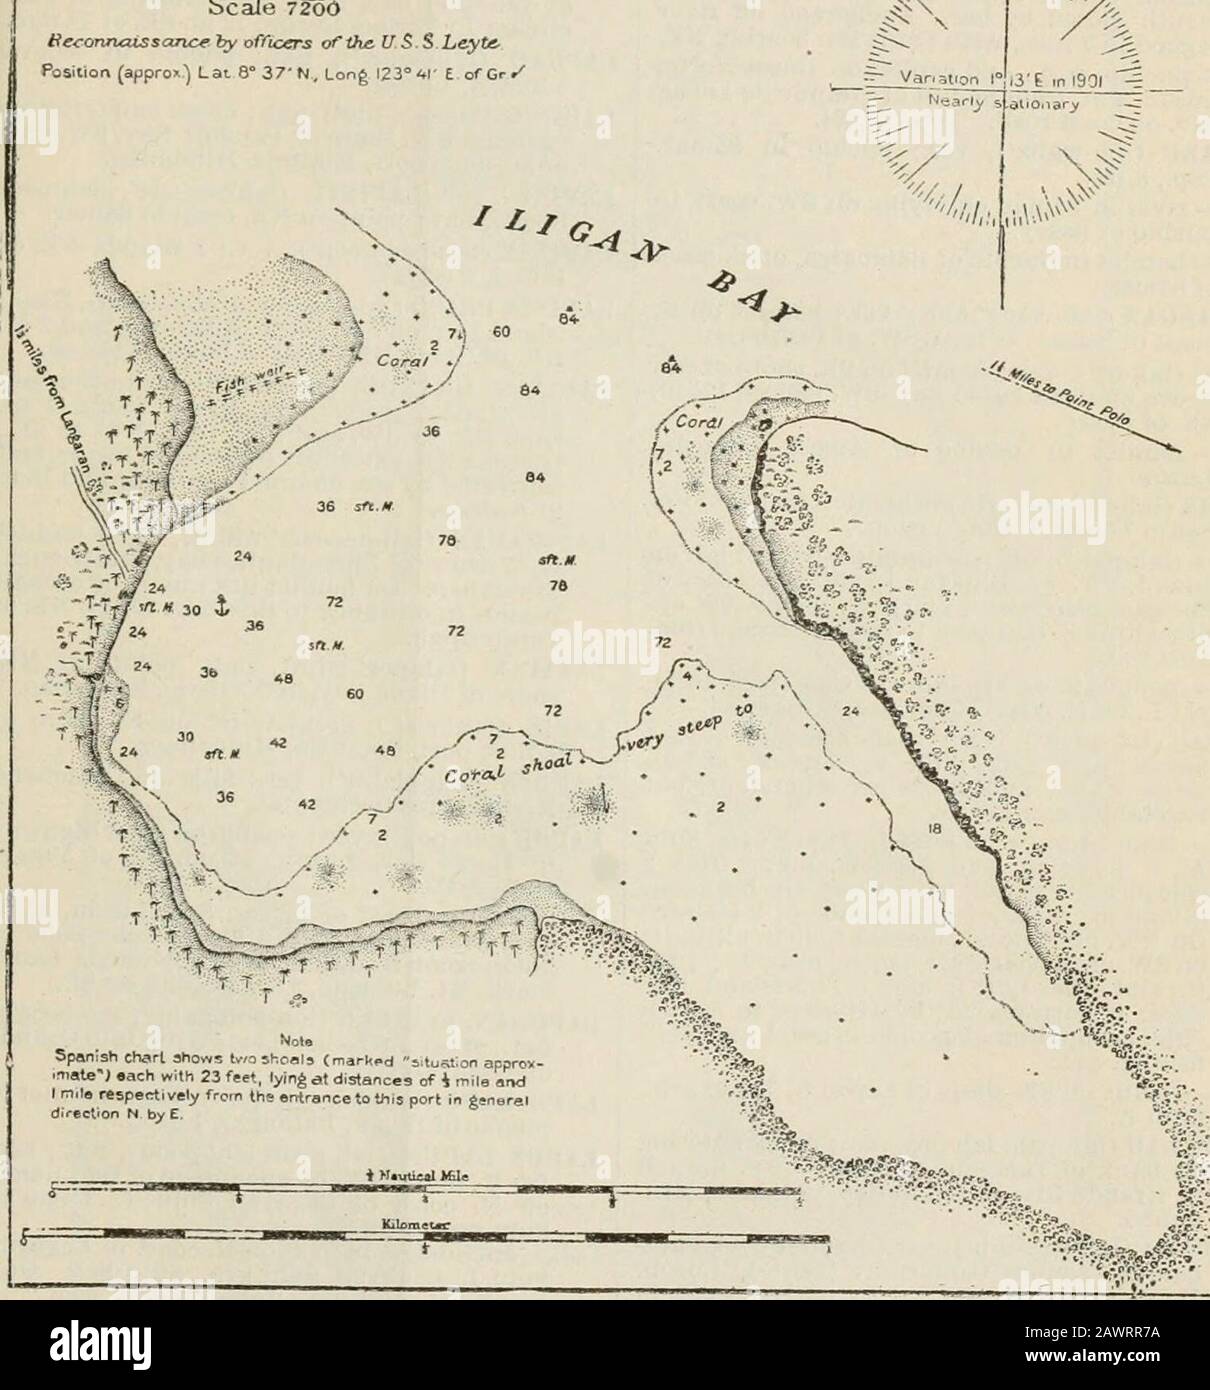 A pronouncing gazetteer and geographical dictionary of the Philippine Islands, United States of America with maps, charts and illustrations . ah-rahn), ver.; town and porton NW. shore of Iligan Bav, Misamis, Min-danao, 17 m. E. of Dapitan. Lat. 8°37N., Ion.123° 41E. Pop, 11,779. river emptying on N. shore of Iligan Bay at town of same name on its r. bank, Misa-mis, Mindanao. LANGASMATE (lan-gass-mah-tay), ver,; 2 flatislands covered with vegetation, W. of Malu-so Bay, W. coast of Basilan I., S. of Zam-boanga, Mindanao 2 islands of Maluso Bay, WSW of mouth of Maluso Riv., W. coast of Basilan I. Stock Photo